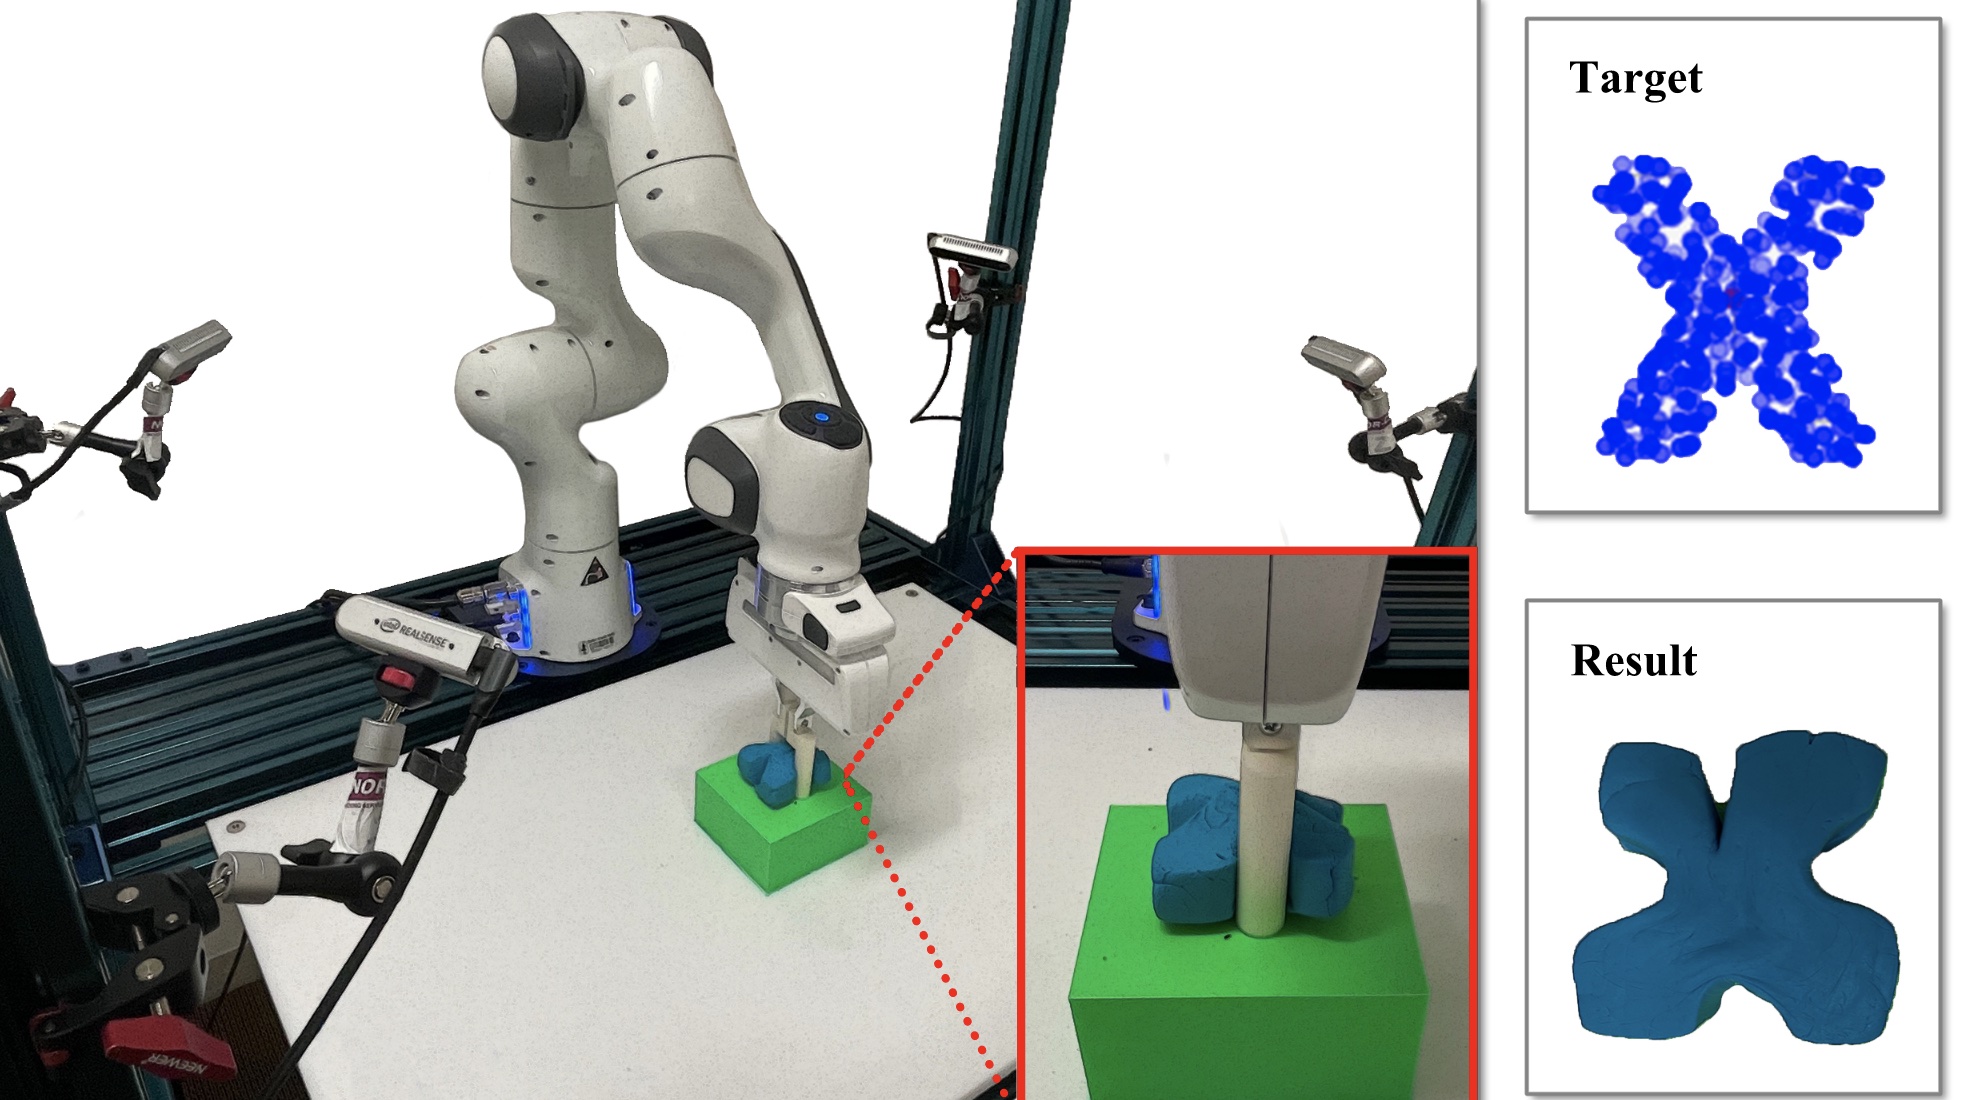 Robots play with play dough | MIT News